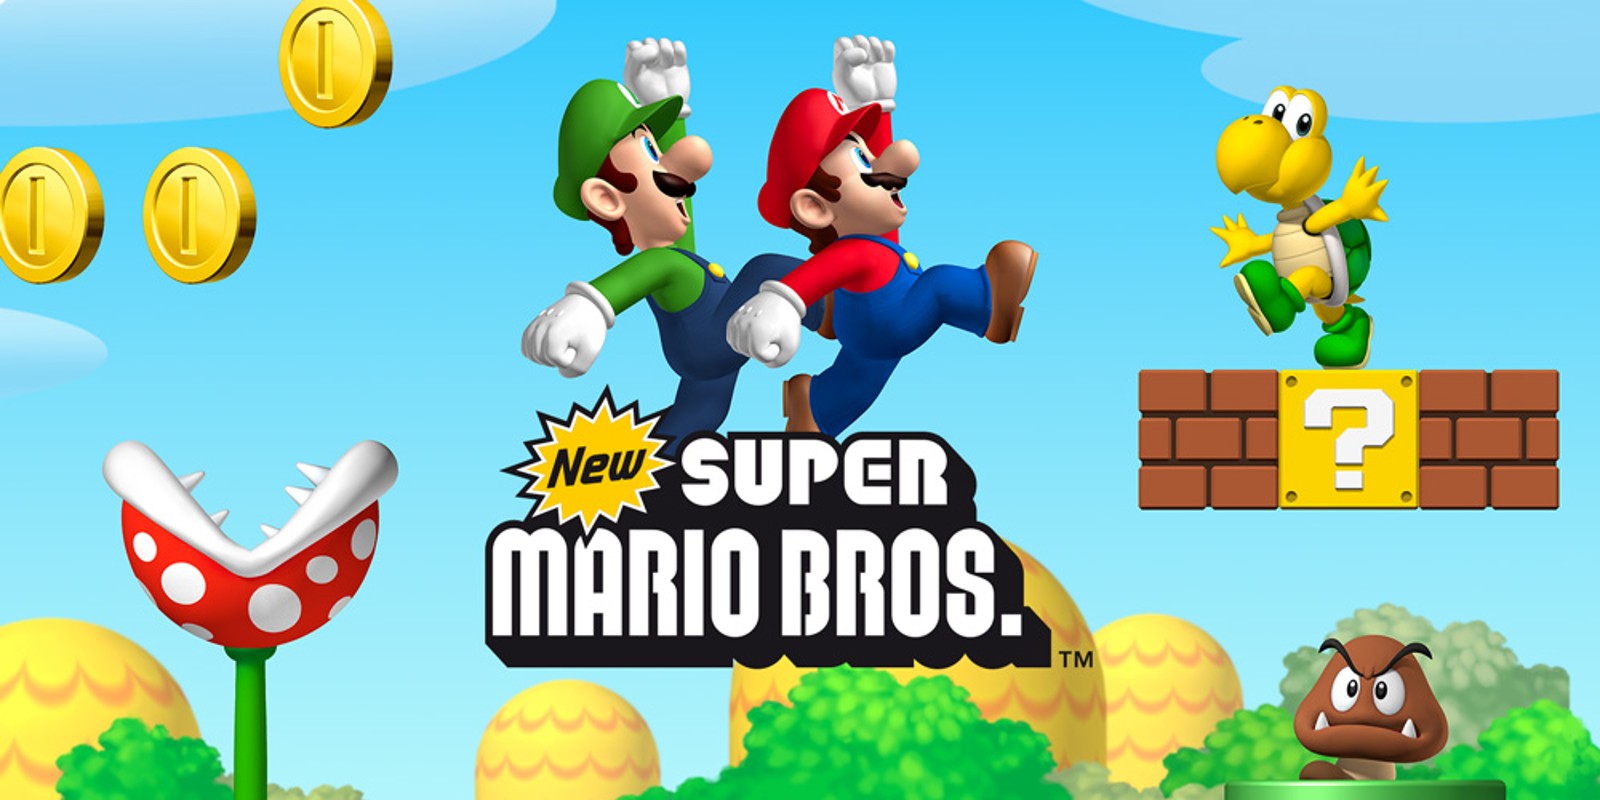 New Super Mario Bros - Most Downloaded PC Video Games in the World